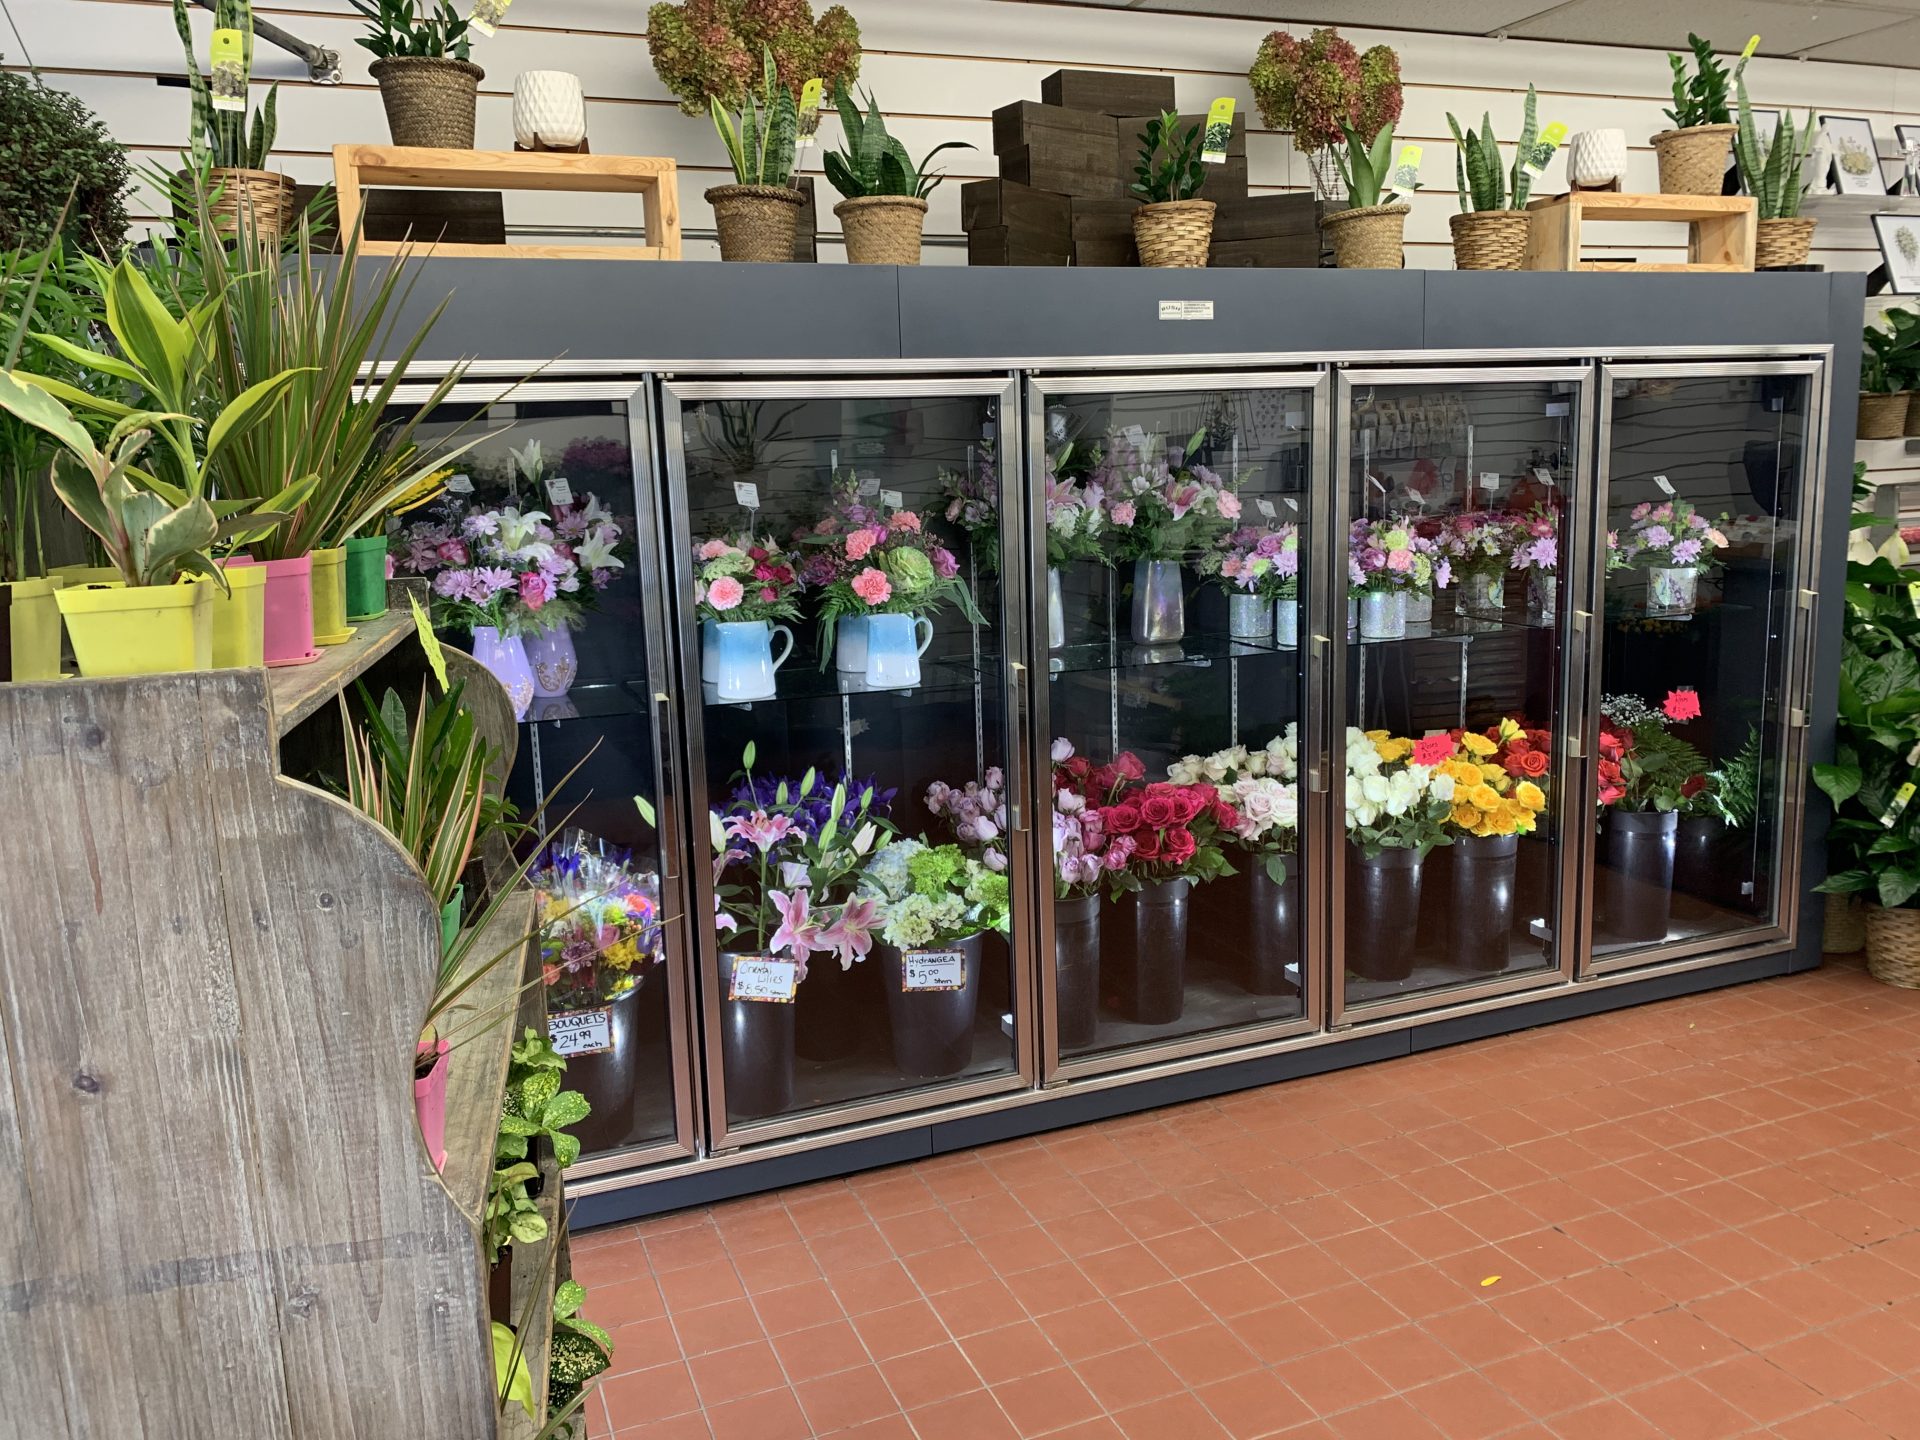 On the left side of the display case, some pre-assembled Mother's Day baskets reside. Or, Westcott allows you to order custom arrangements ahead of time.